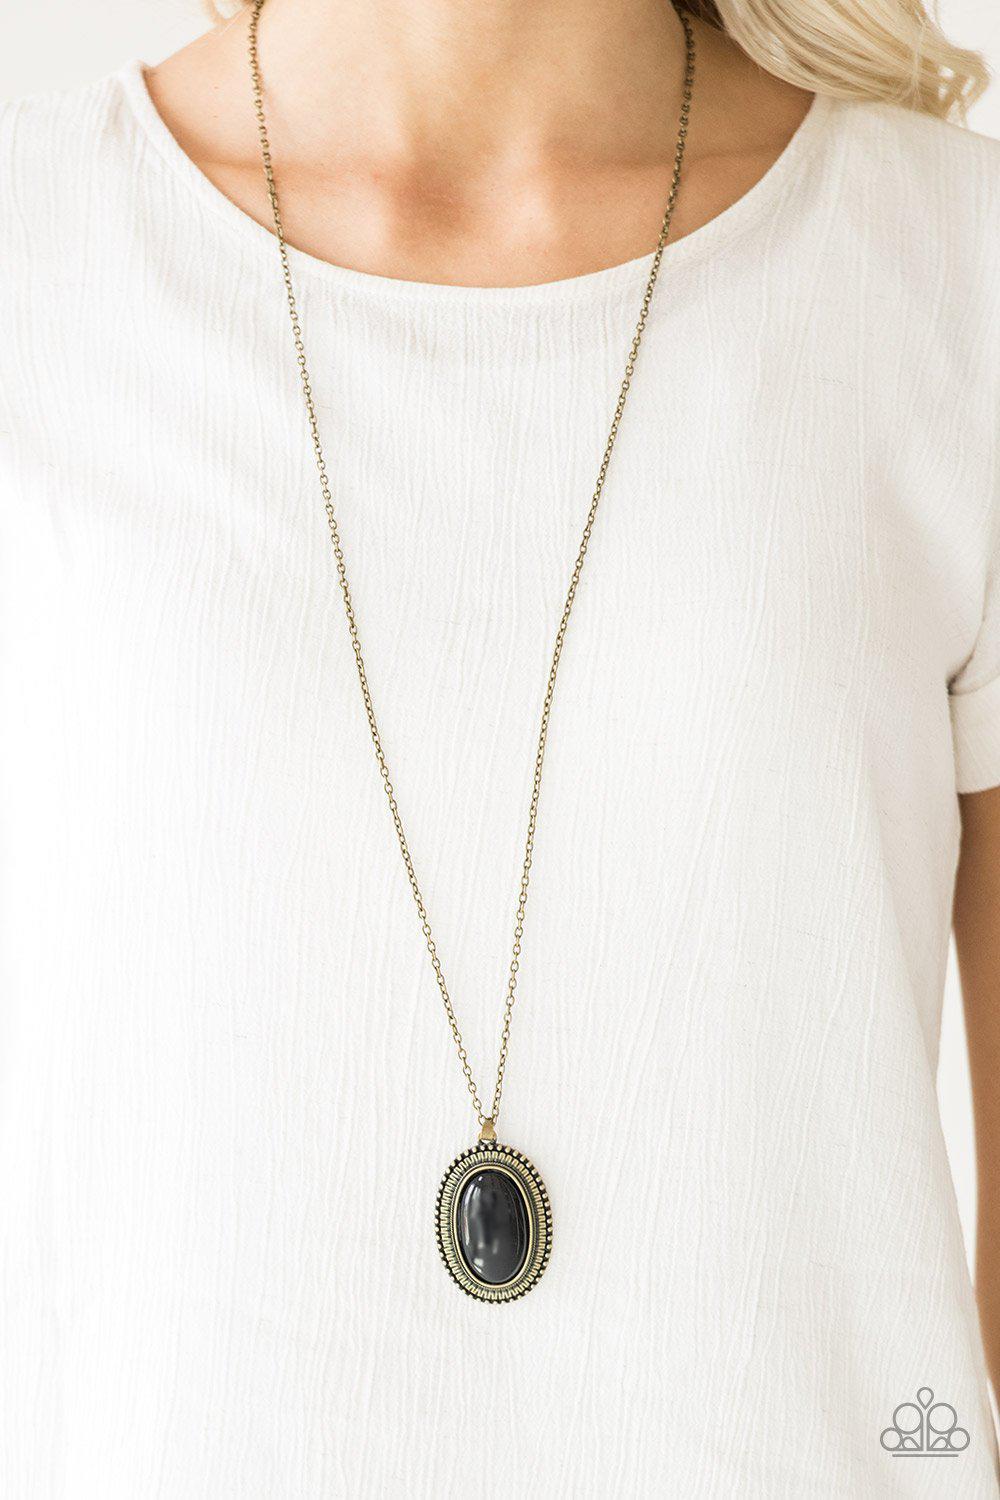 Practical Prairie Brass and Black Necklace - Paparazzi Accessories- model - CarasShop.com - $5 Jewelry by Cara Jewels